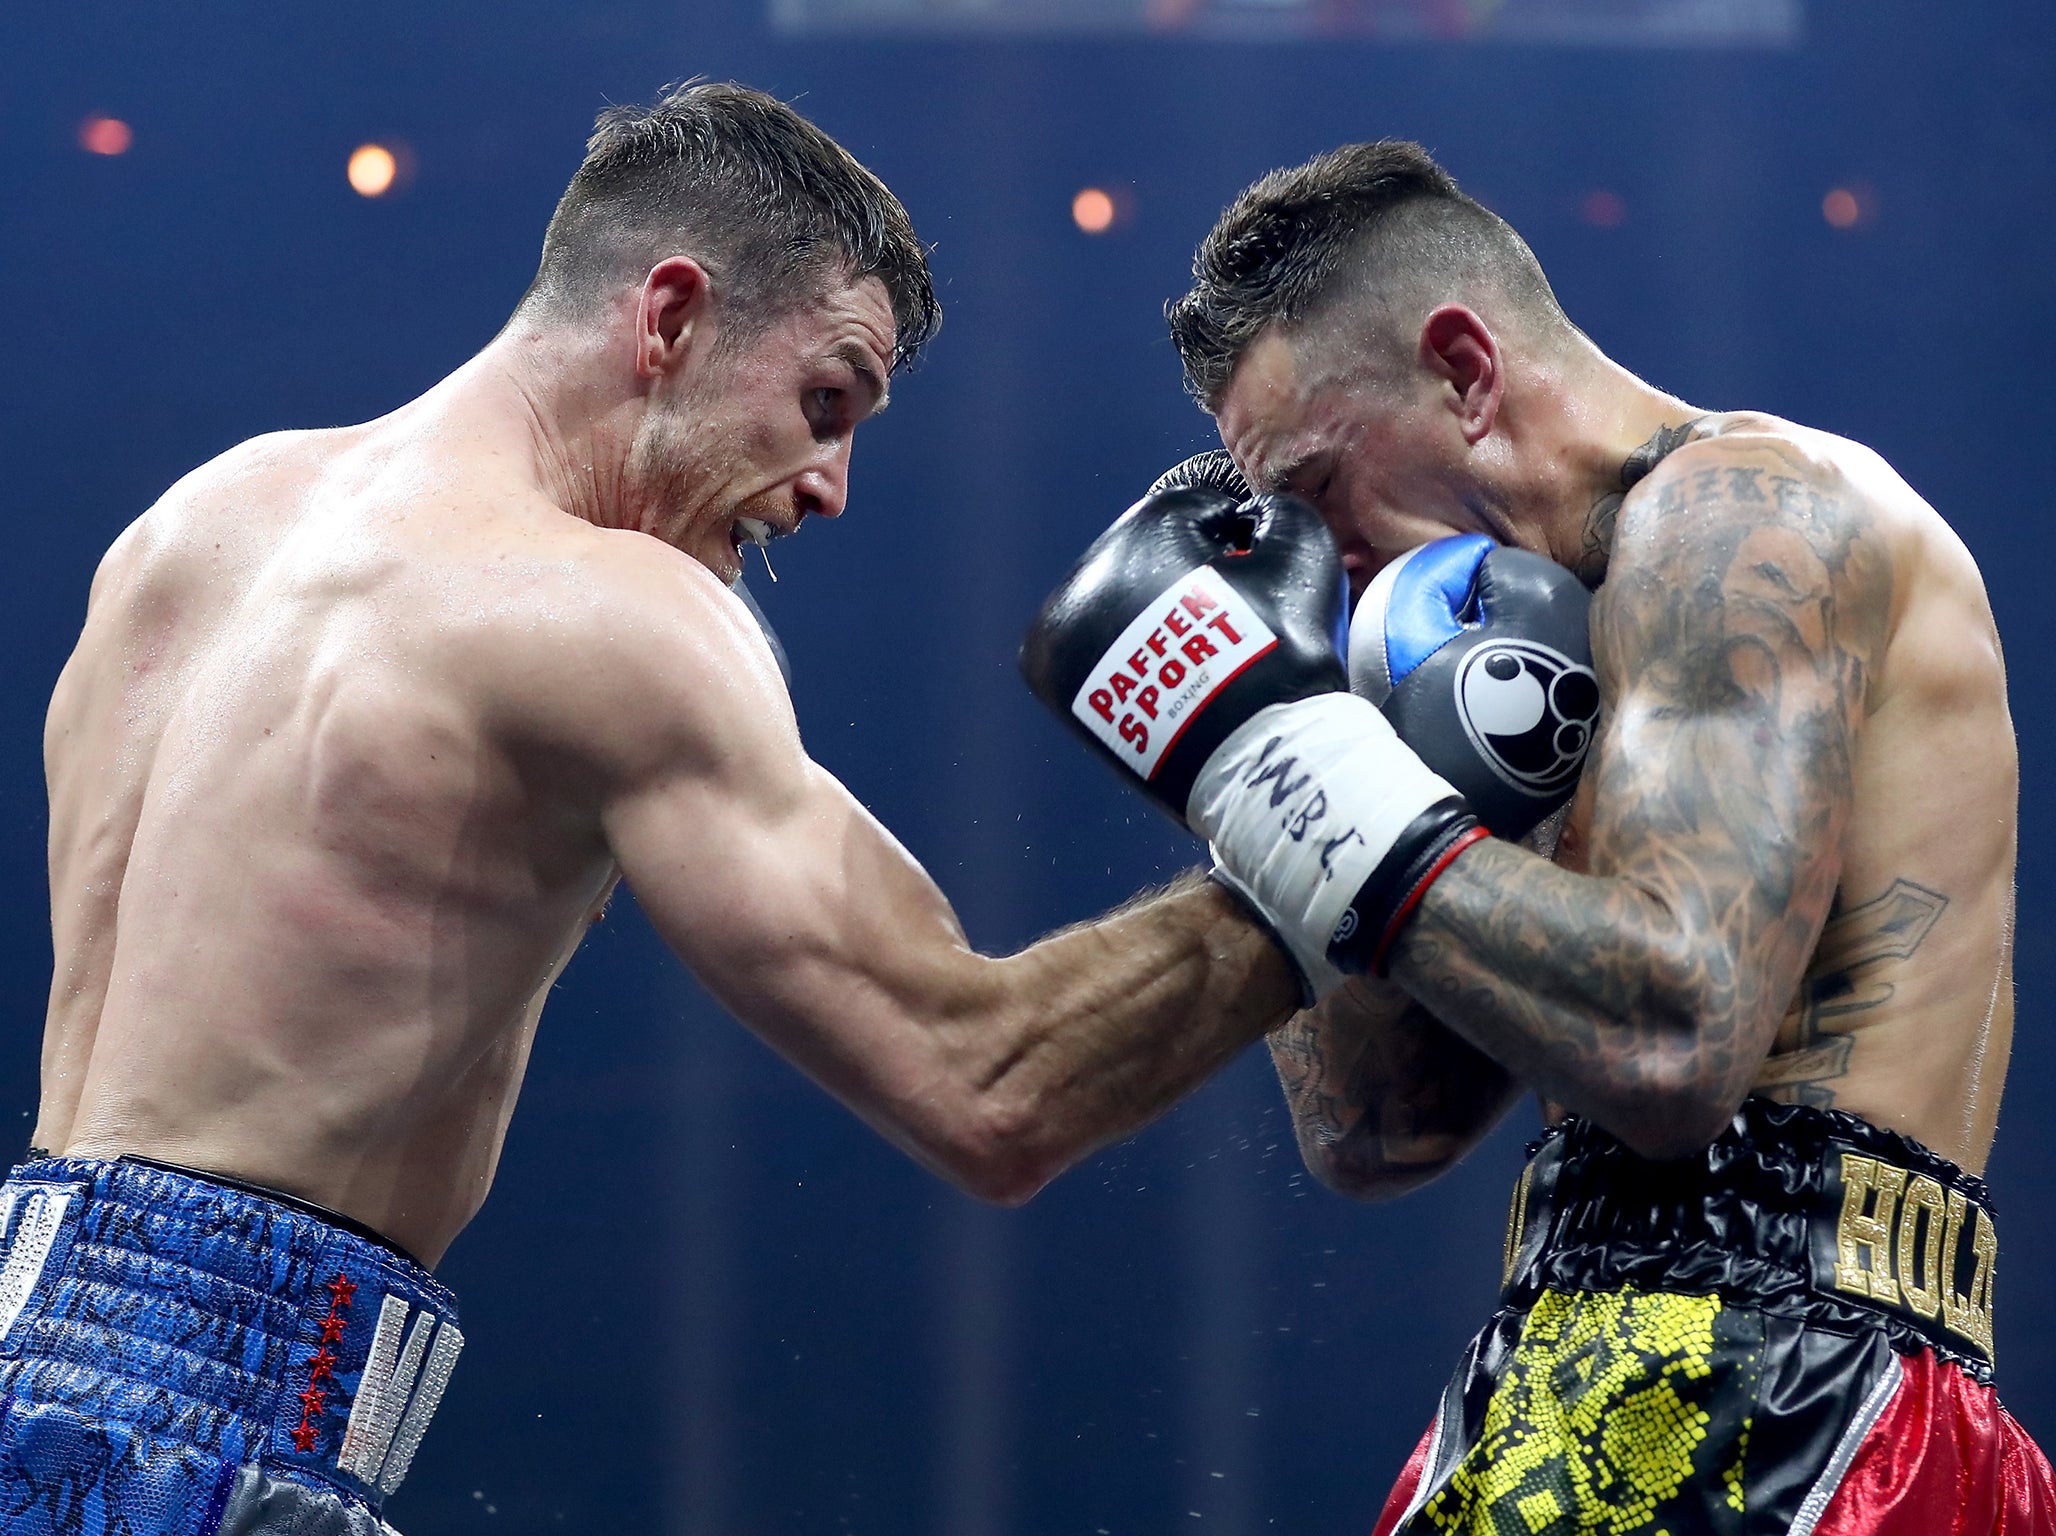 Callum Smith outclassed late replacement Nieky Holzken